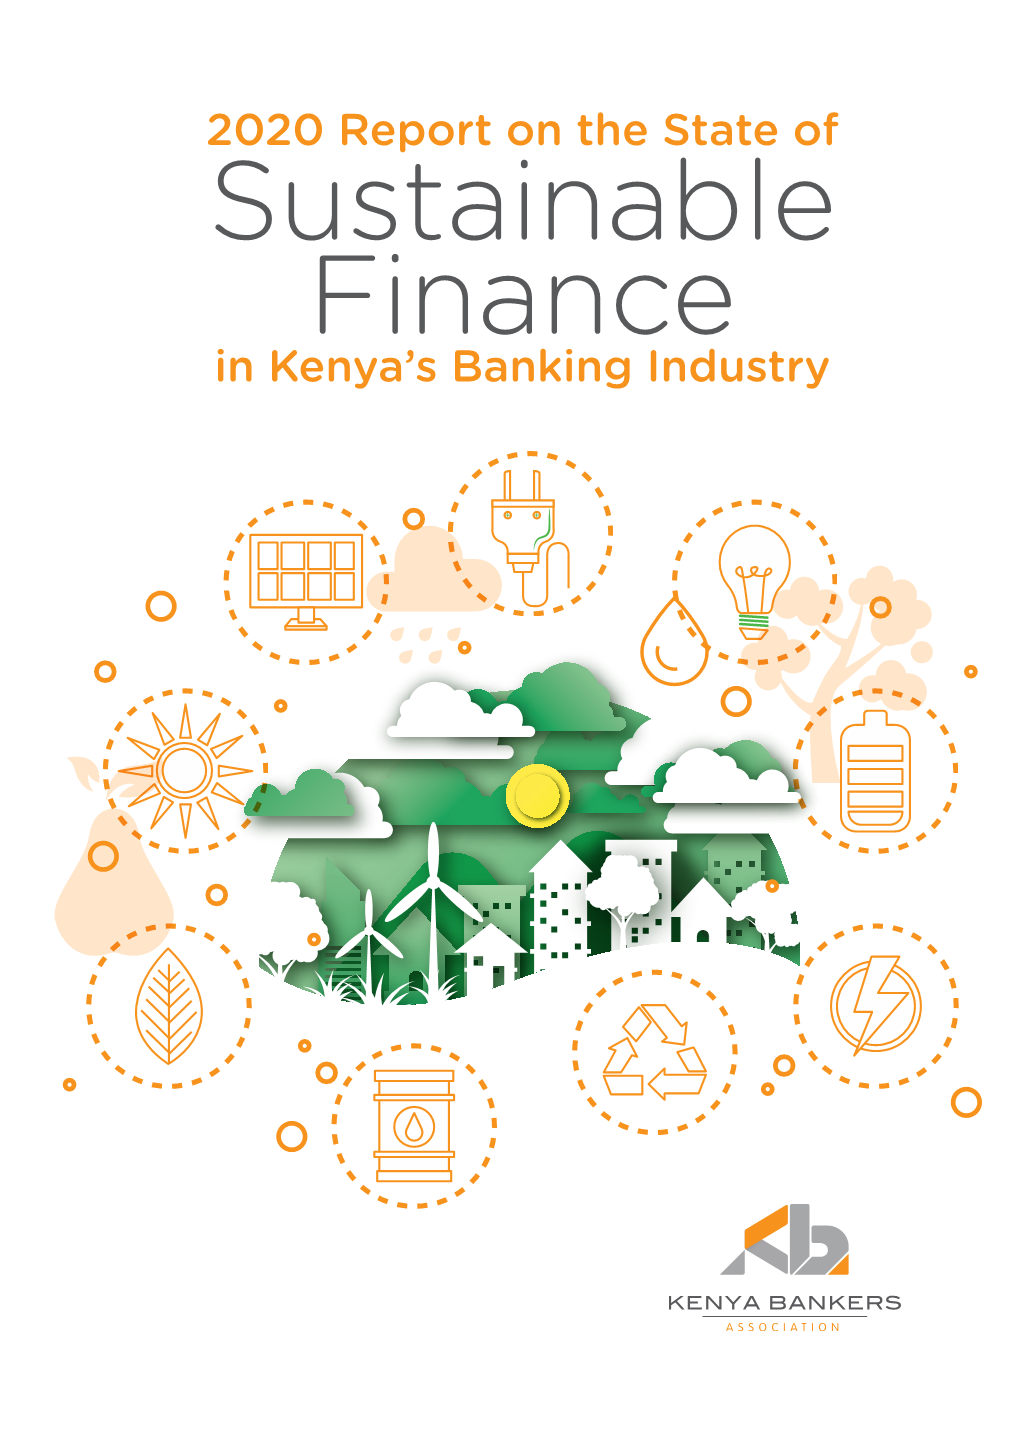 Report on the State of Sustainable Finance in Kenya's Banking Industry